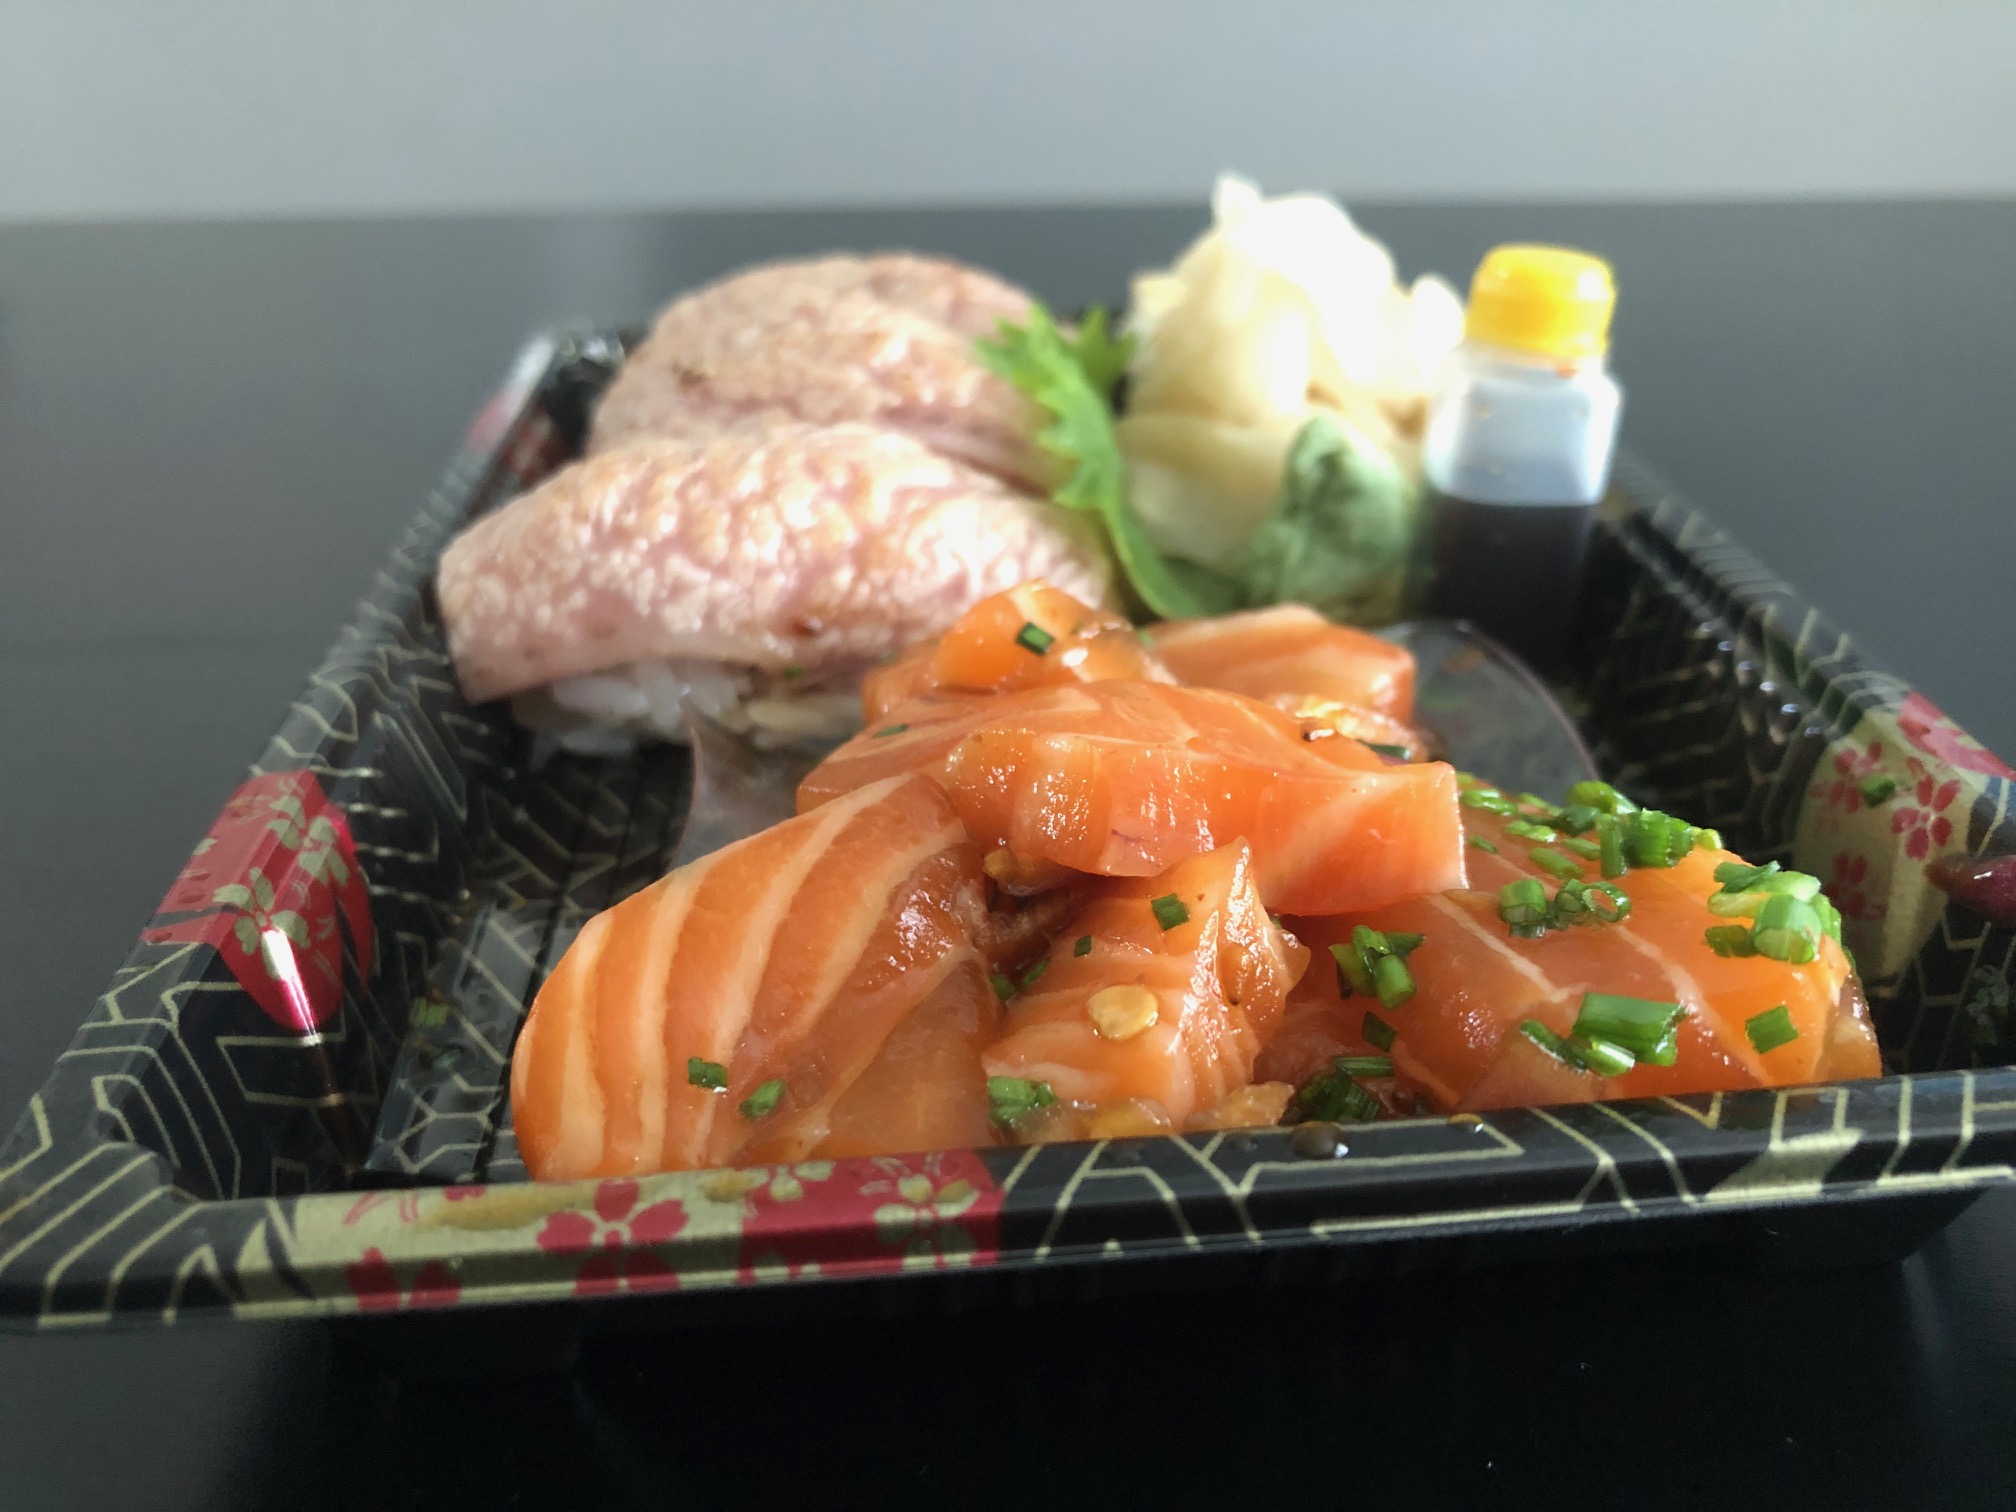 From the side, the rectangular takeout tray shows marinated raw salmon chunks with specks of green onion. Behind the salmon poke, is seared tuna. Photo by Alyssa Buckley.